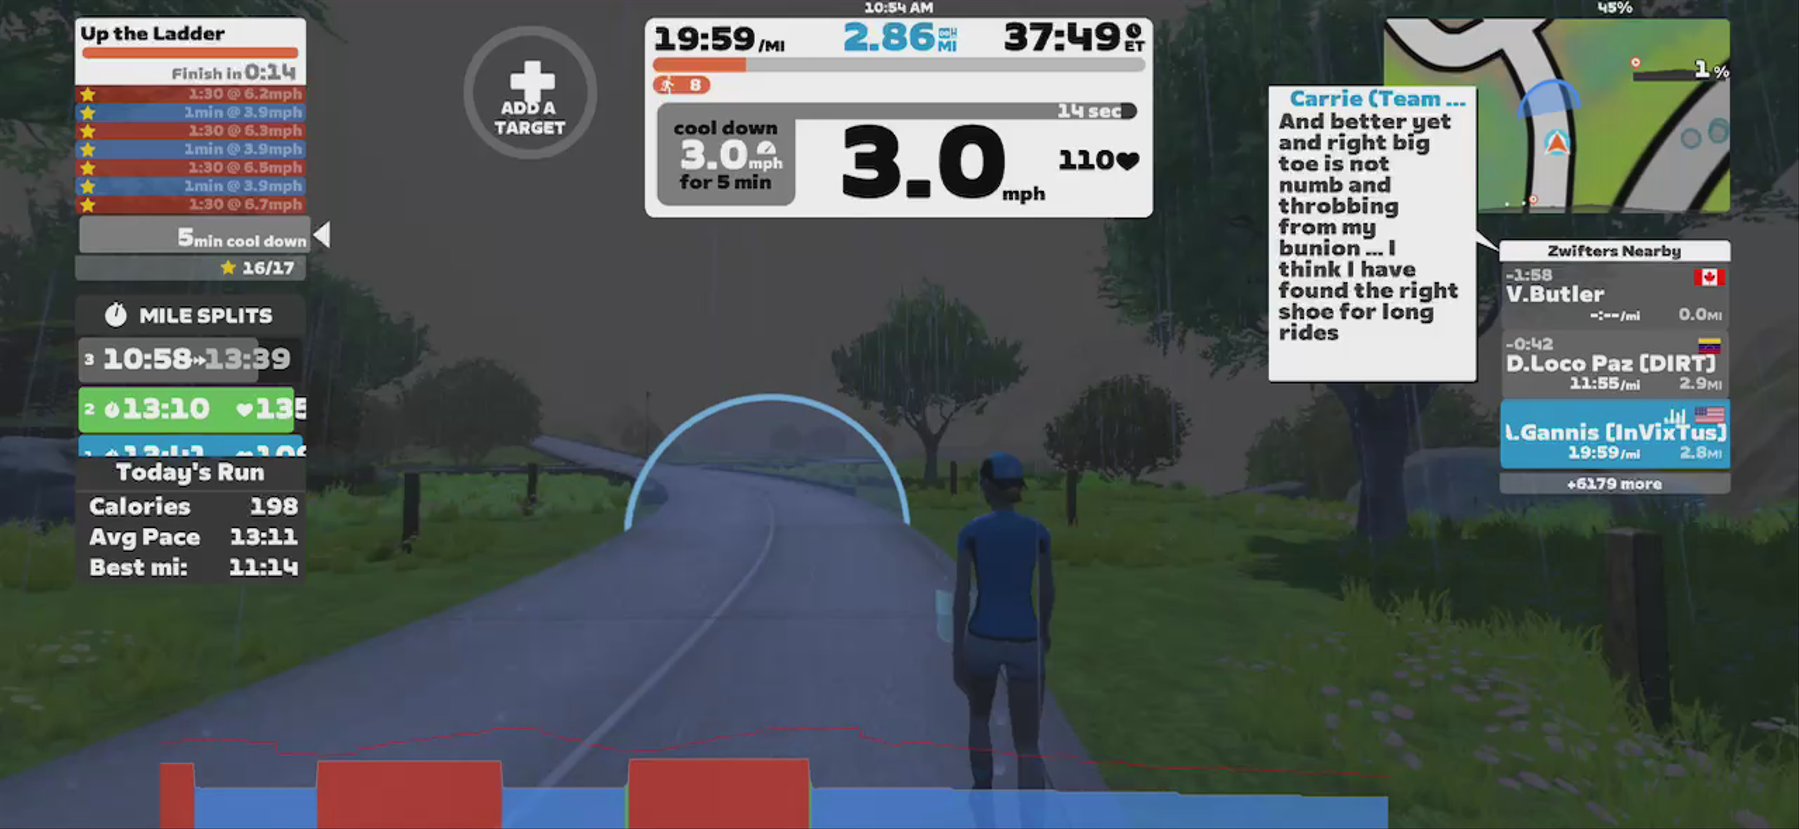 Zwift - Up the Ladder in Watopia